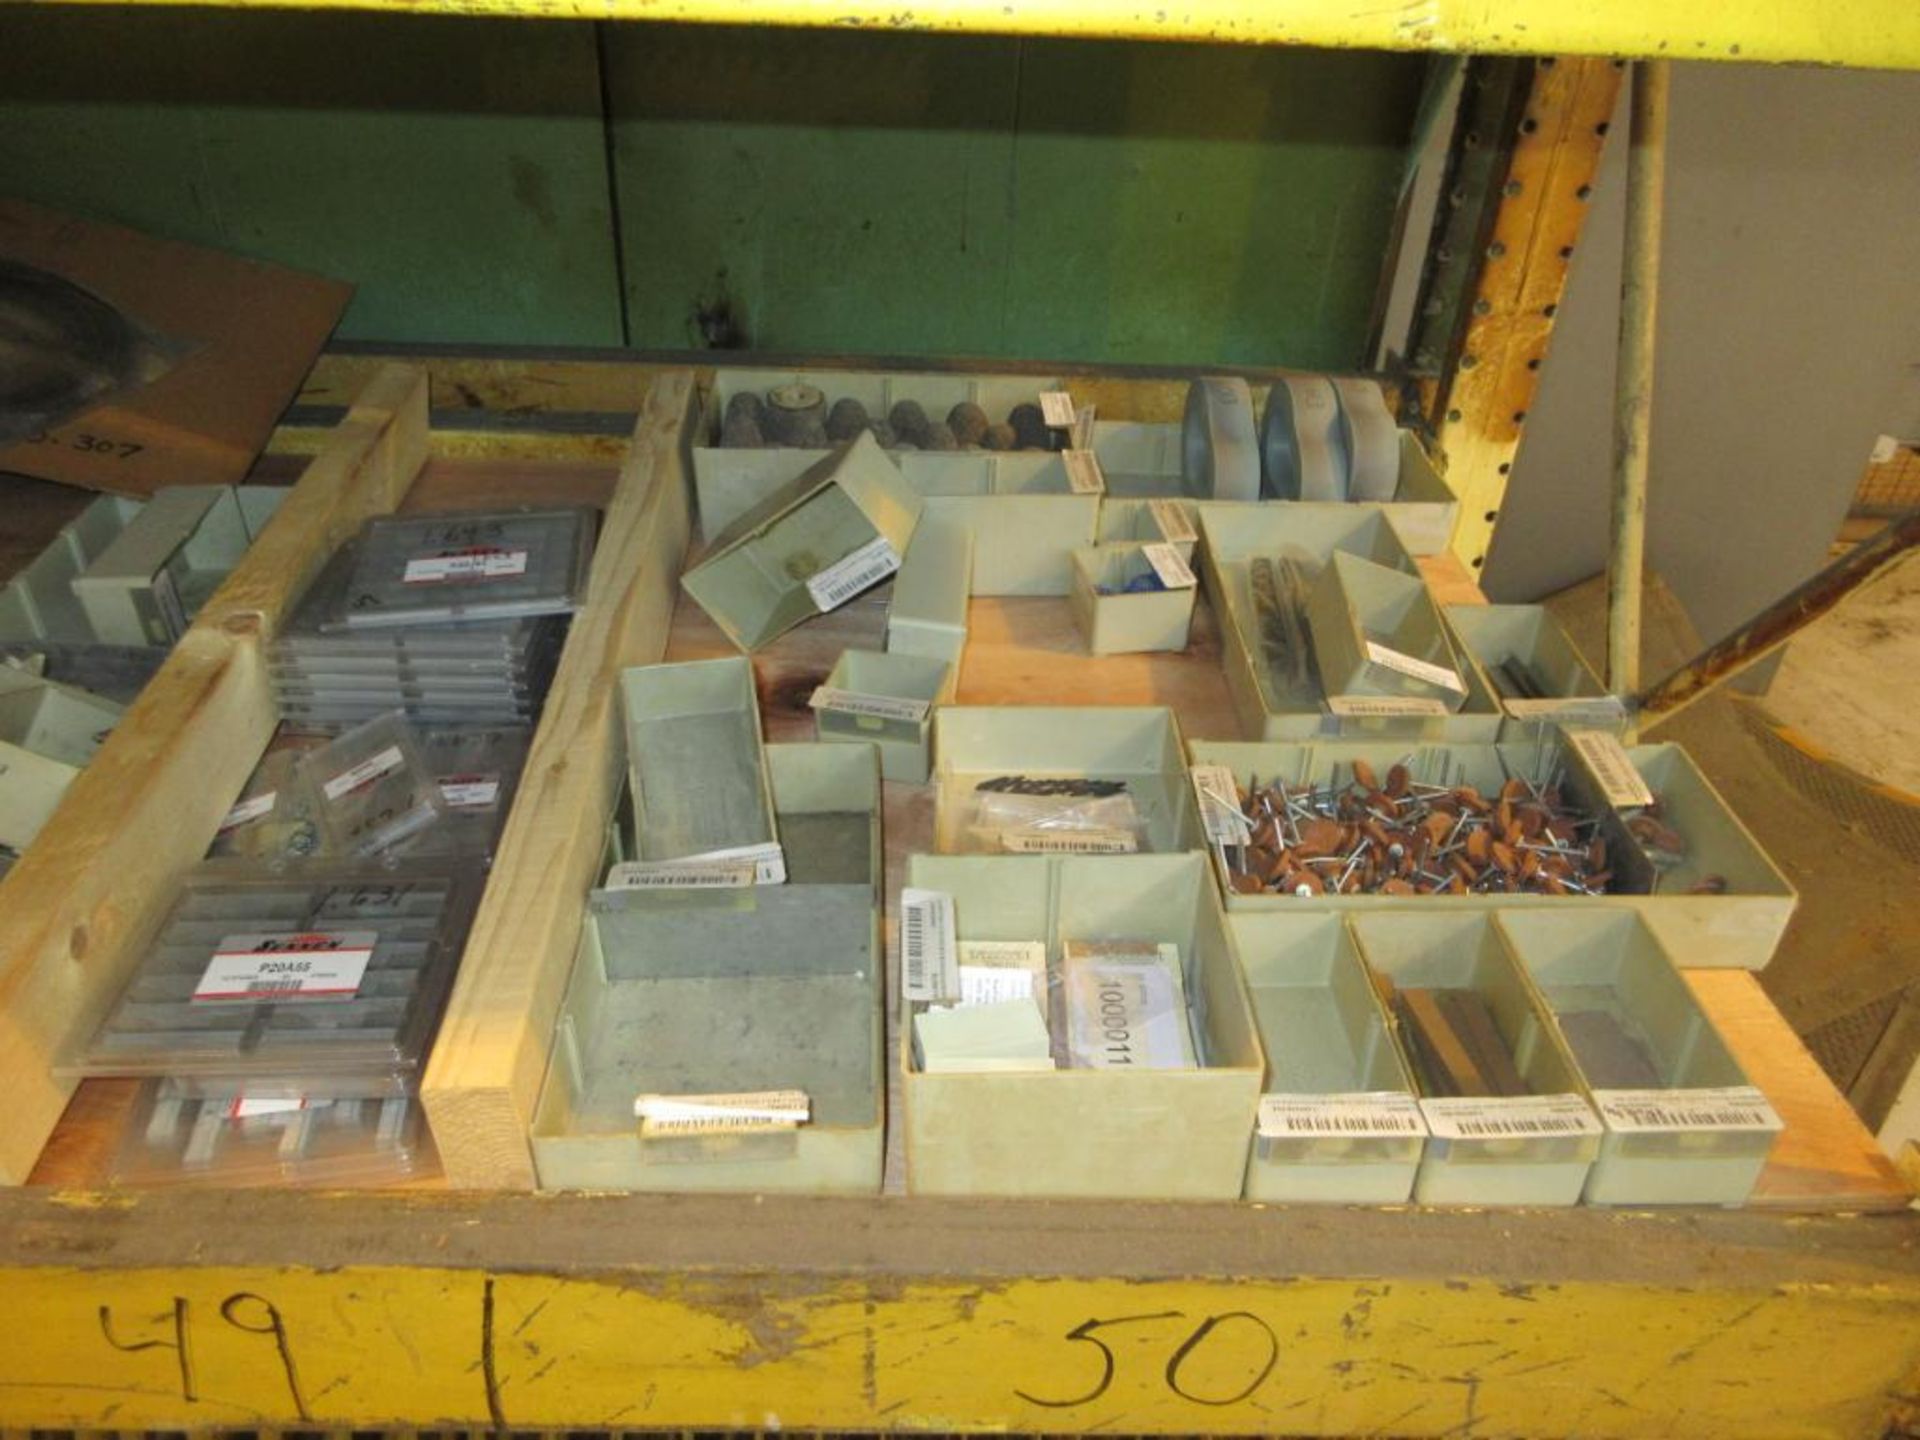 CONTENTS OF (22) SECTIONS PALLET RACK: ASSORTED ABRASIVES, SUNNEN STONES, TOOL BITS, DOVETAIL CUTTER